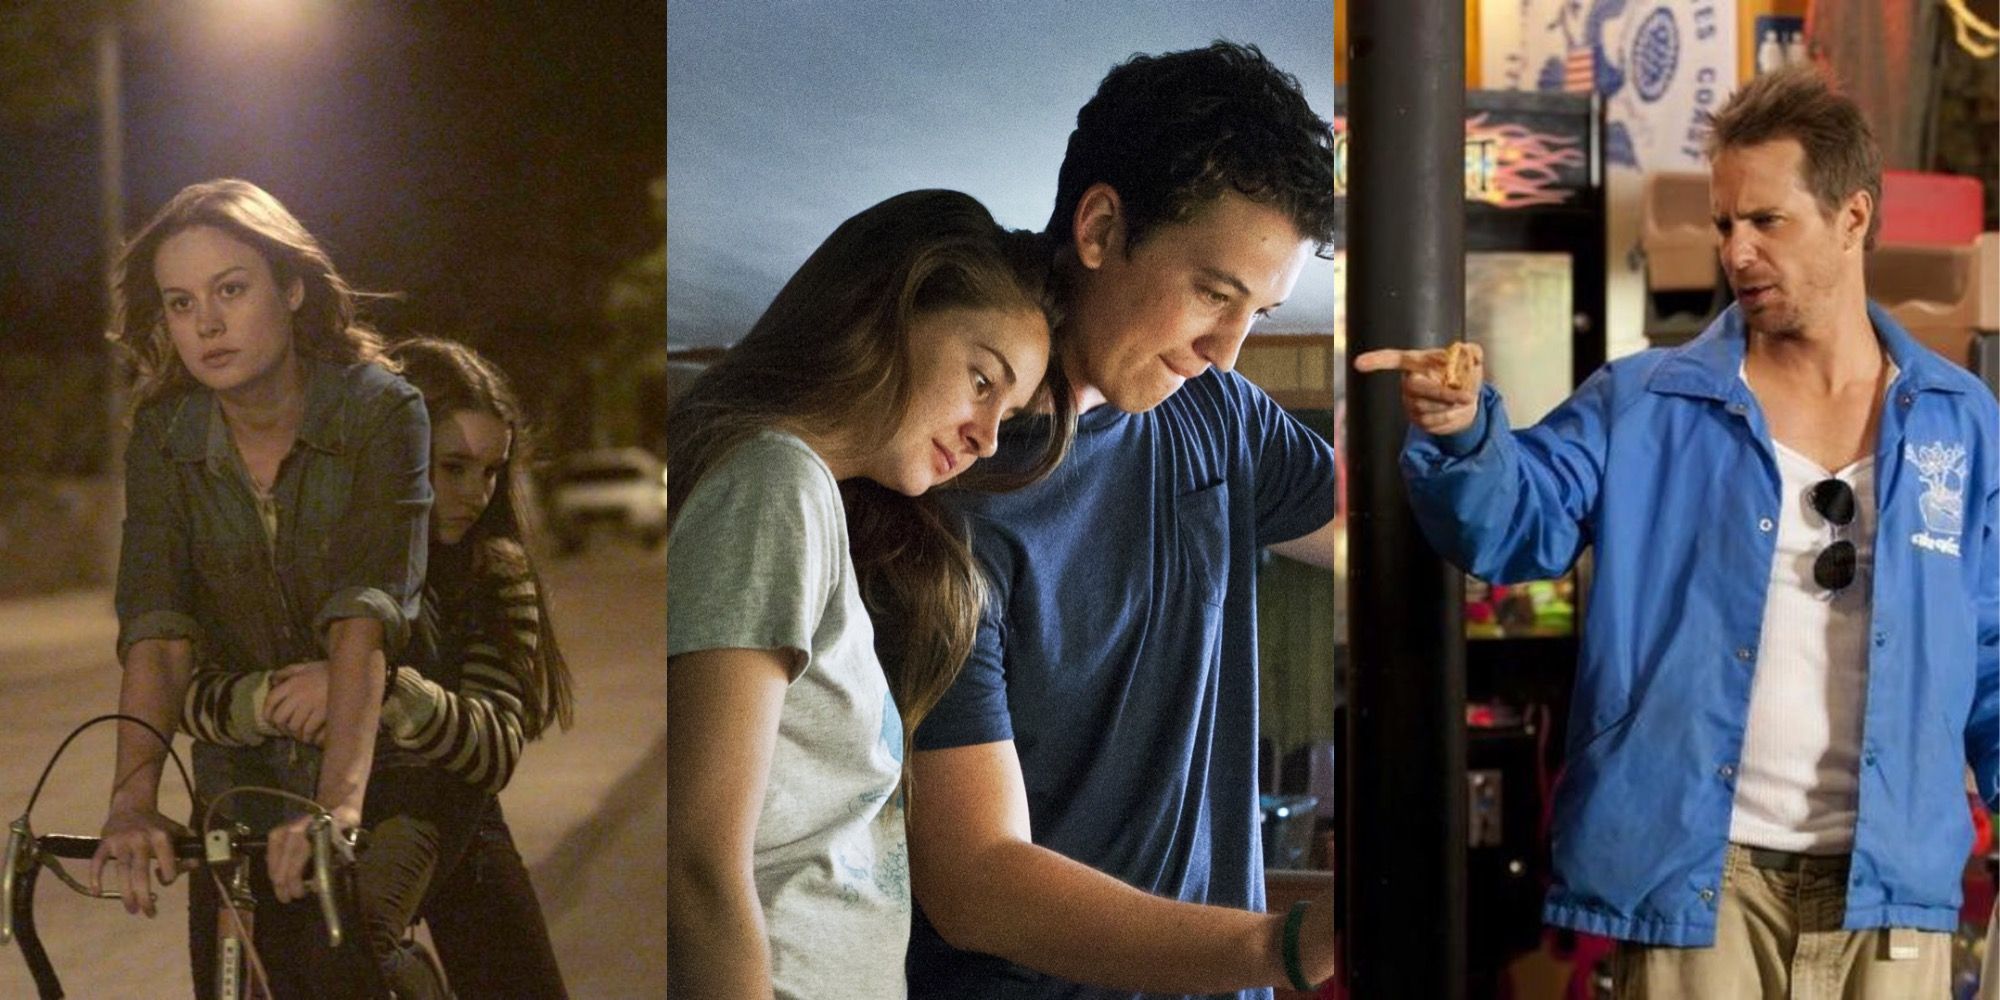 Short Term 12, The Spectacular Now and The Way Way Back